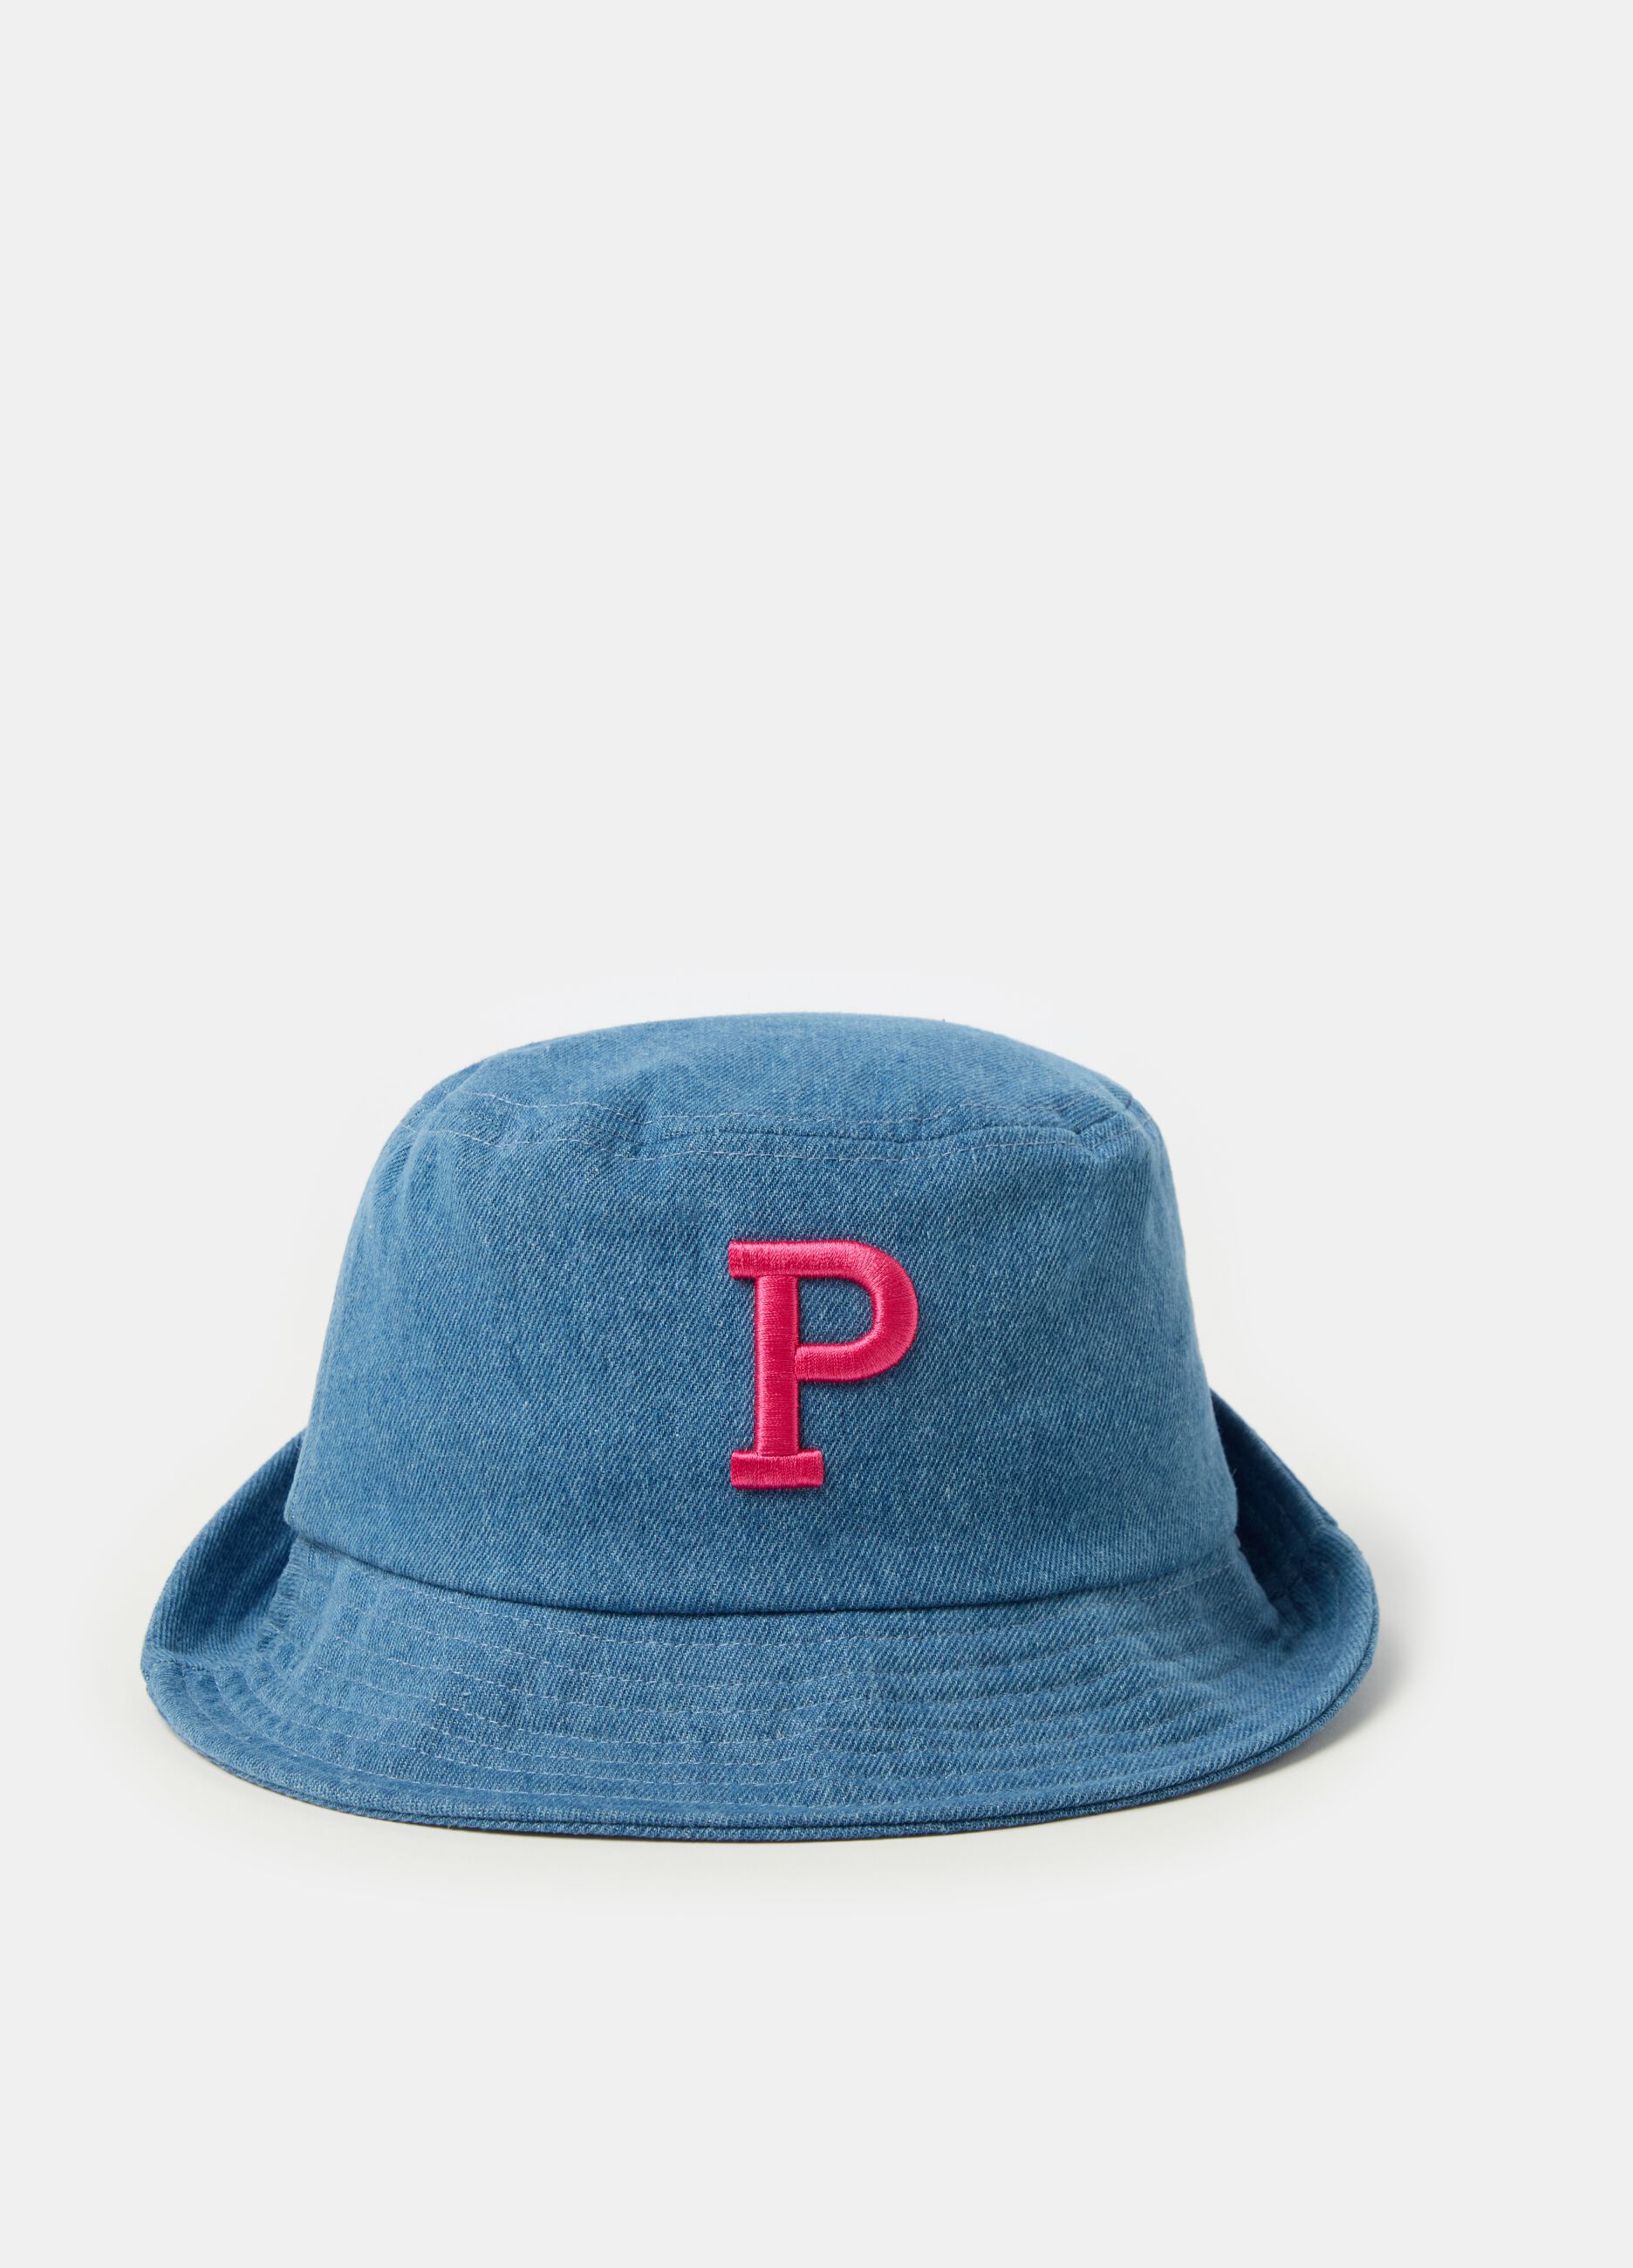 Denim hat with logo embroidery